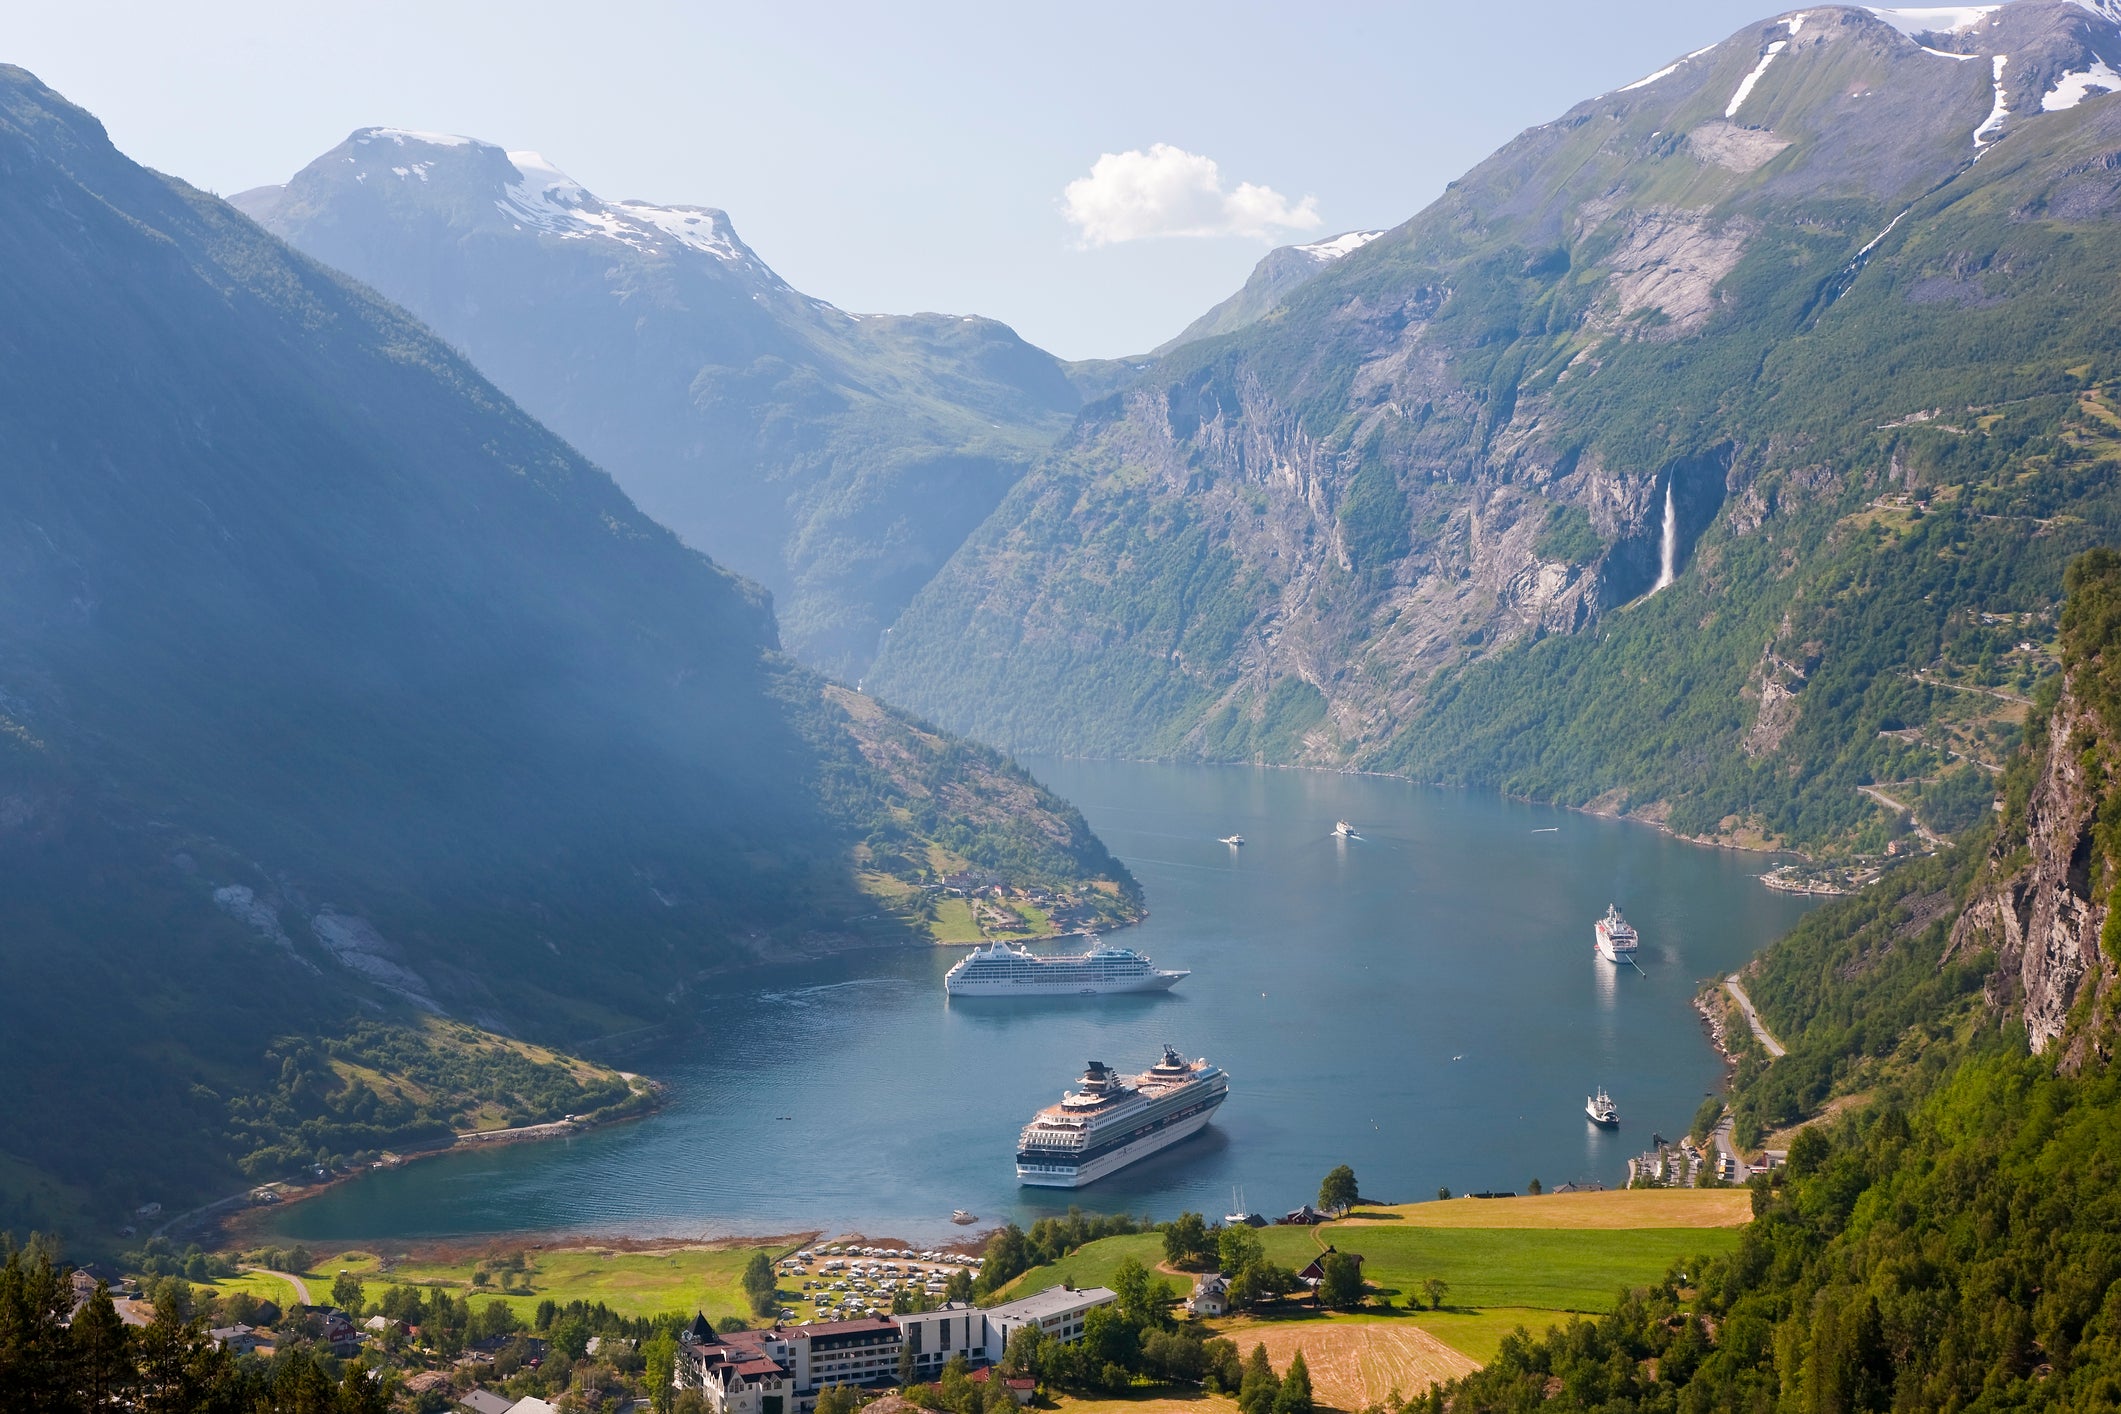 Cruise ships in Geirangerfjord, Norway.